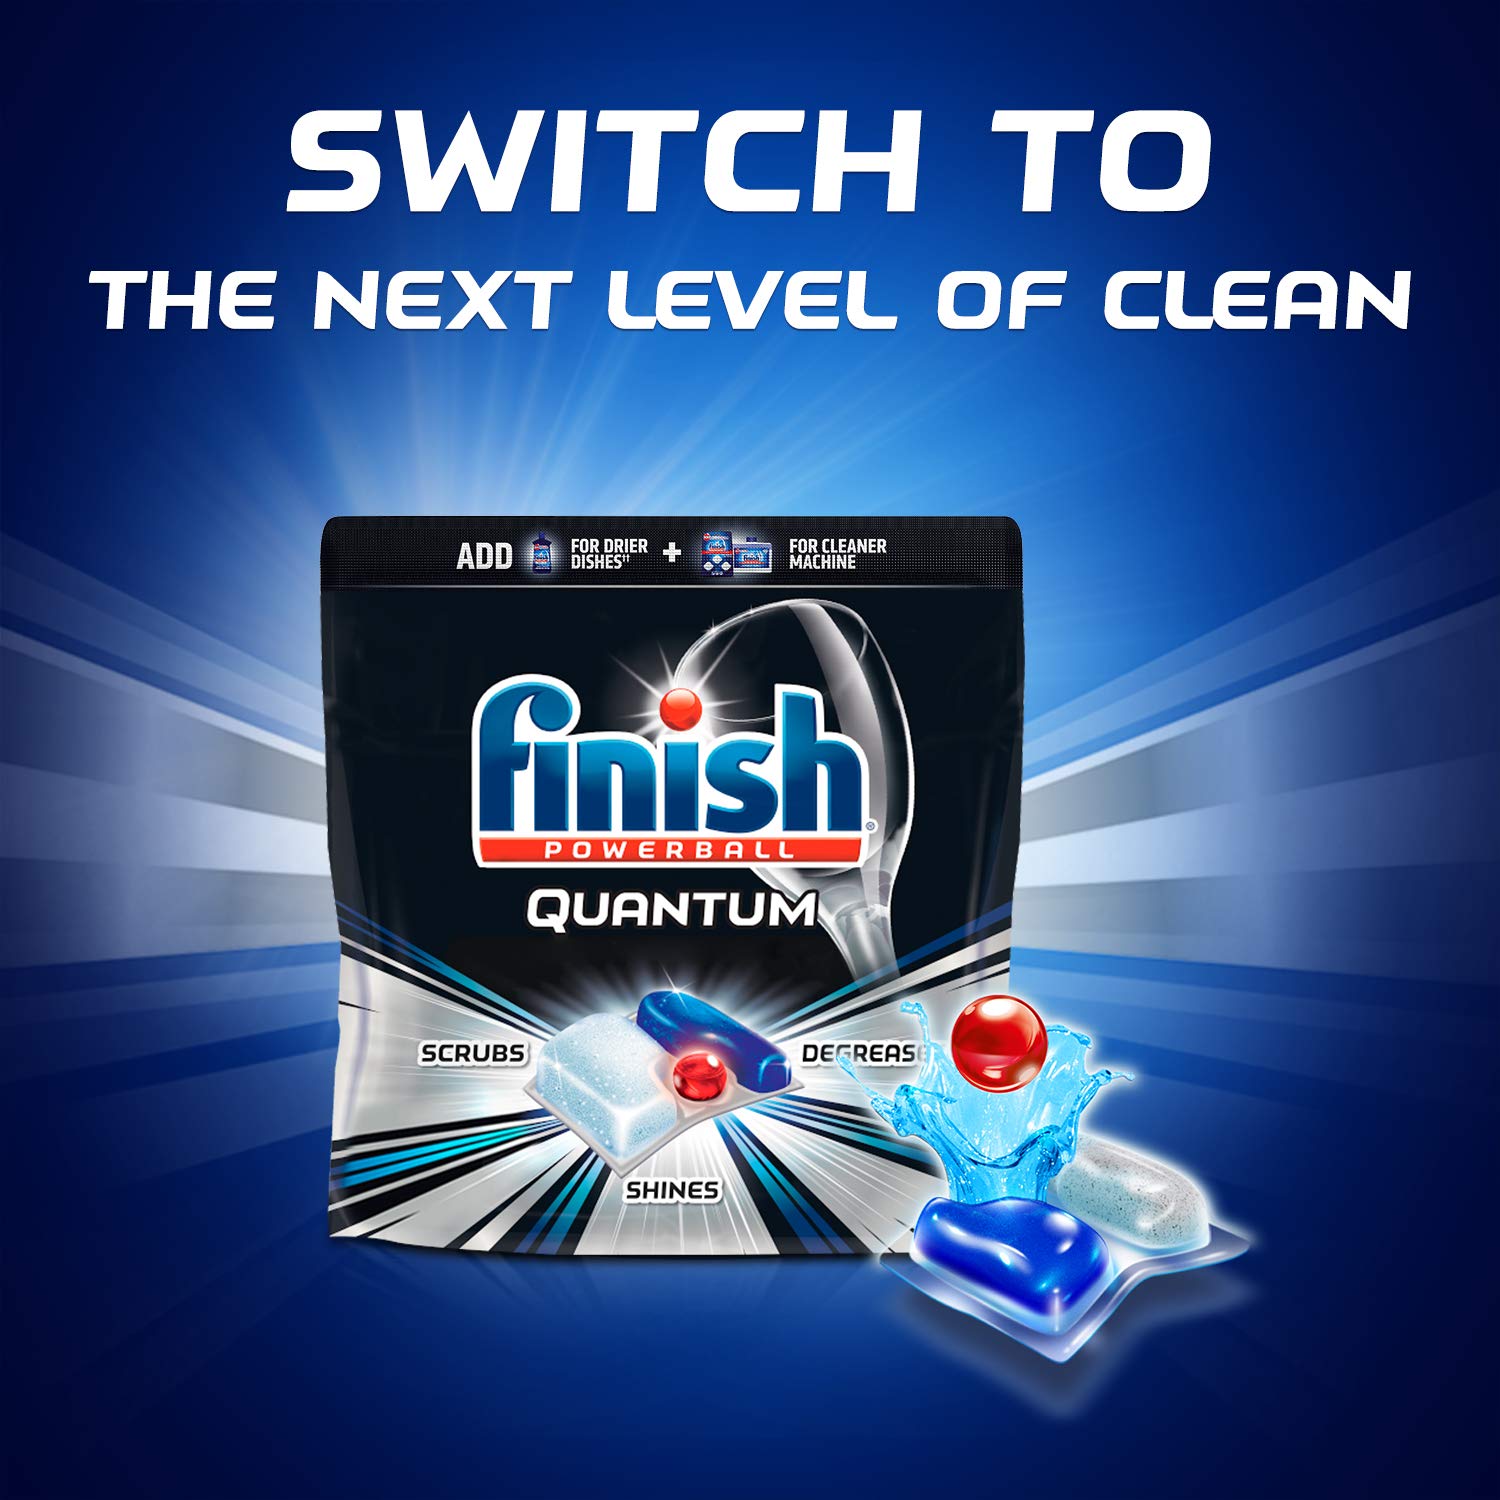 Finish - Max in 1 - 43ct - Dishwasher Detergent - Powerball - Wrapper Free Dishwashing Tablets - Dish Tabs - Packaging May Vary